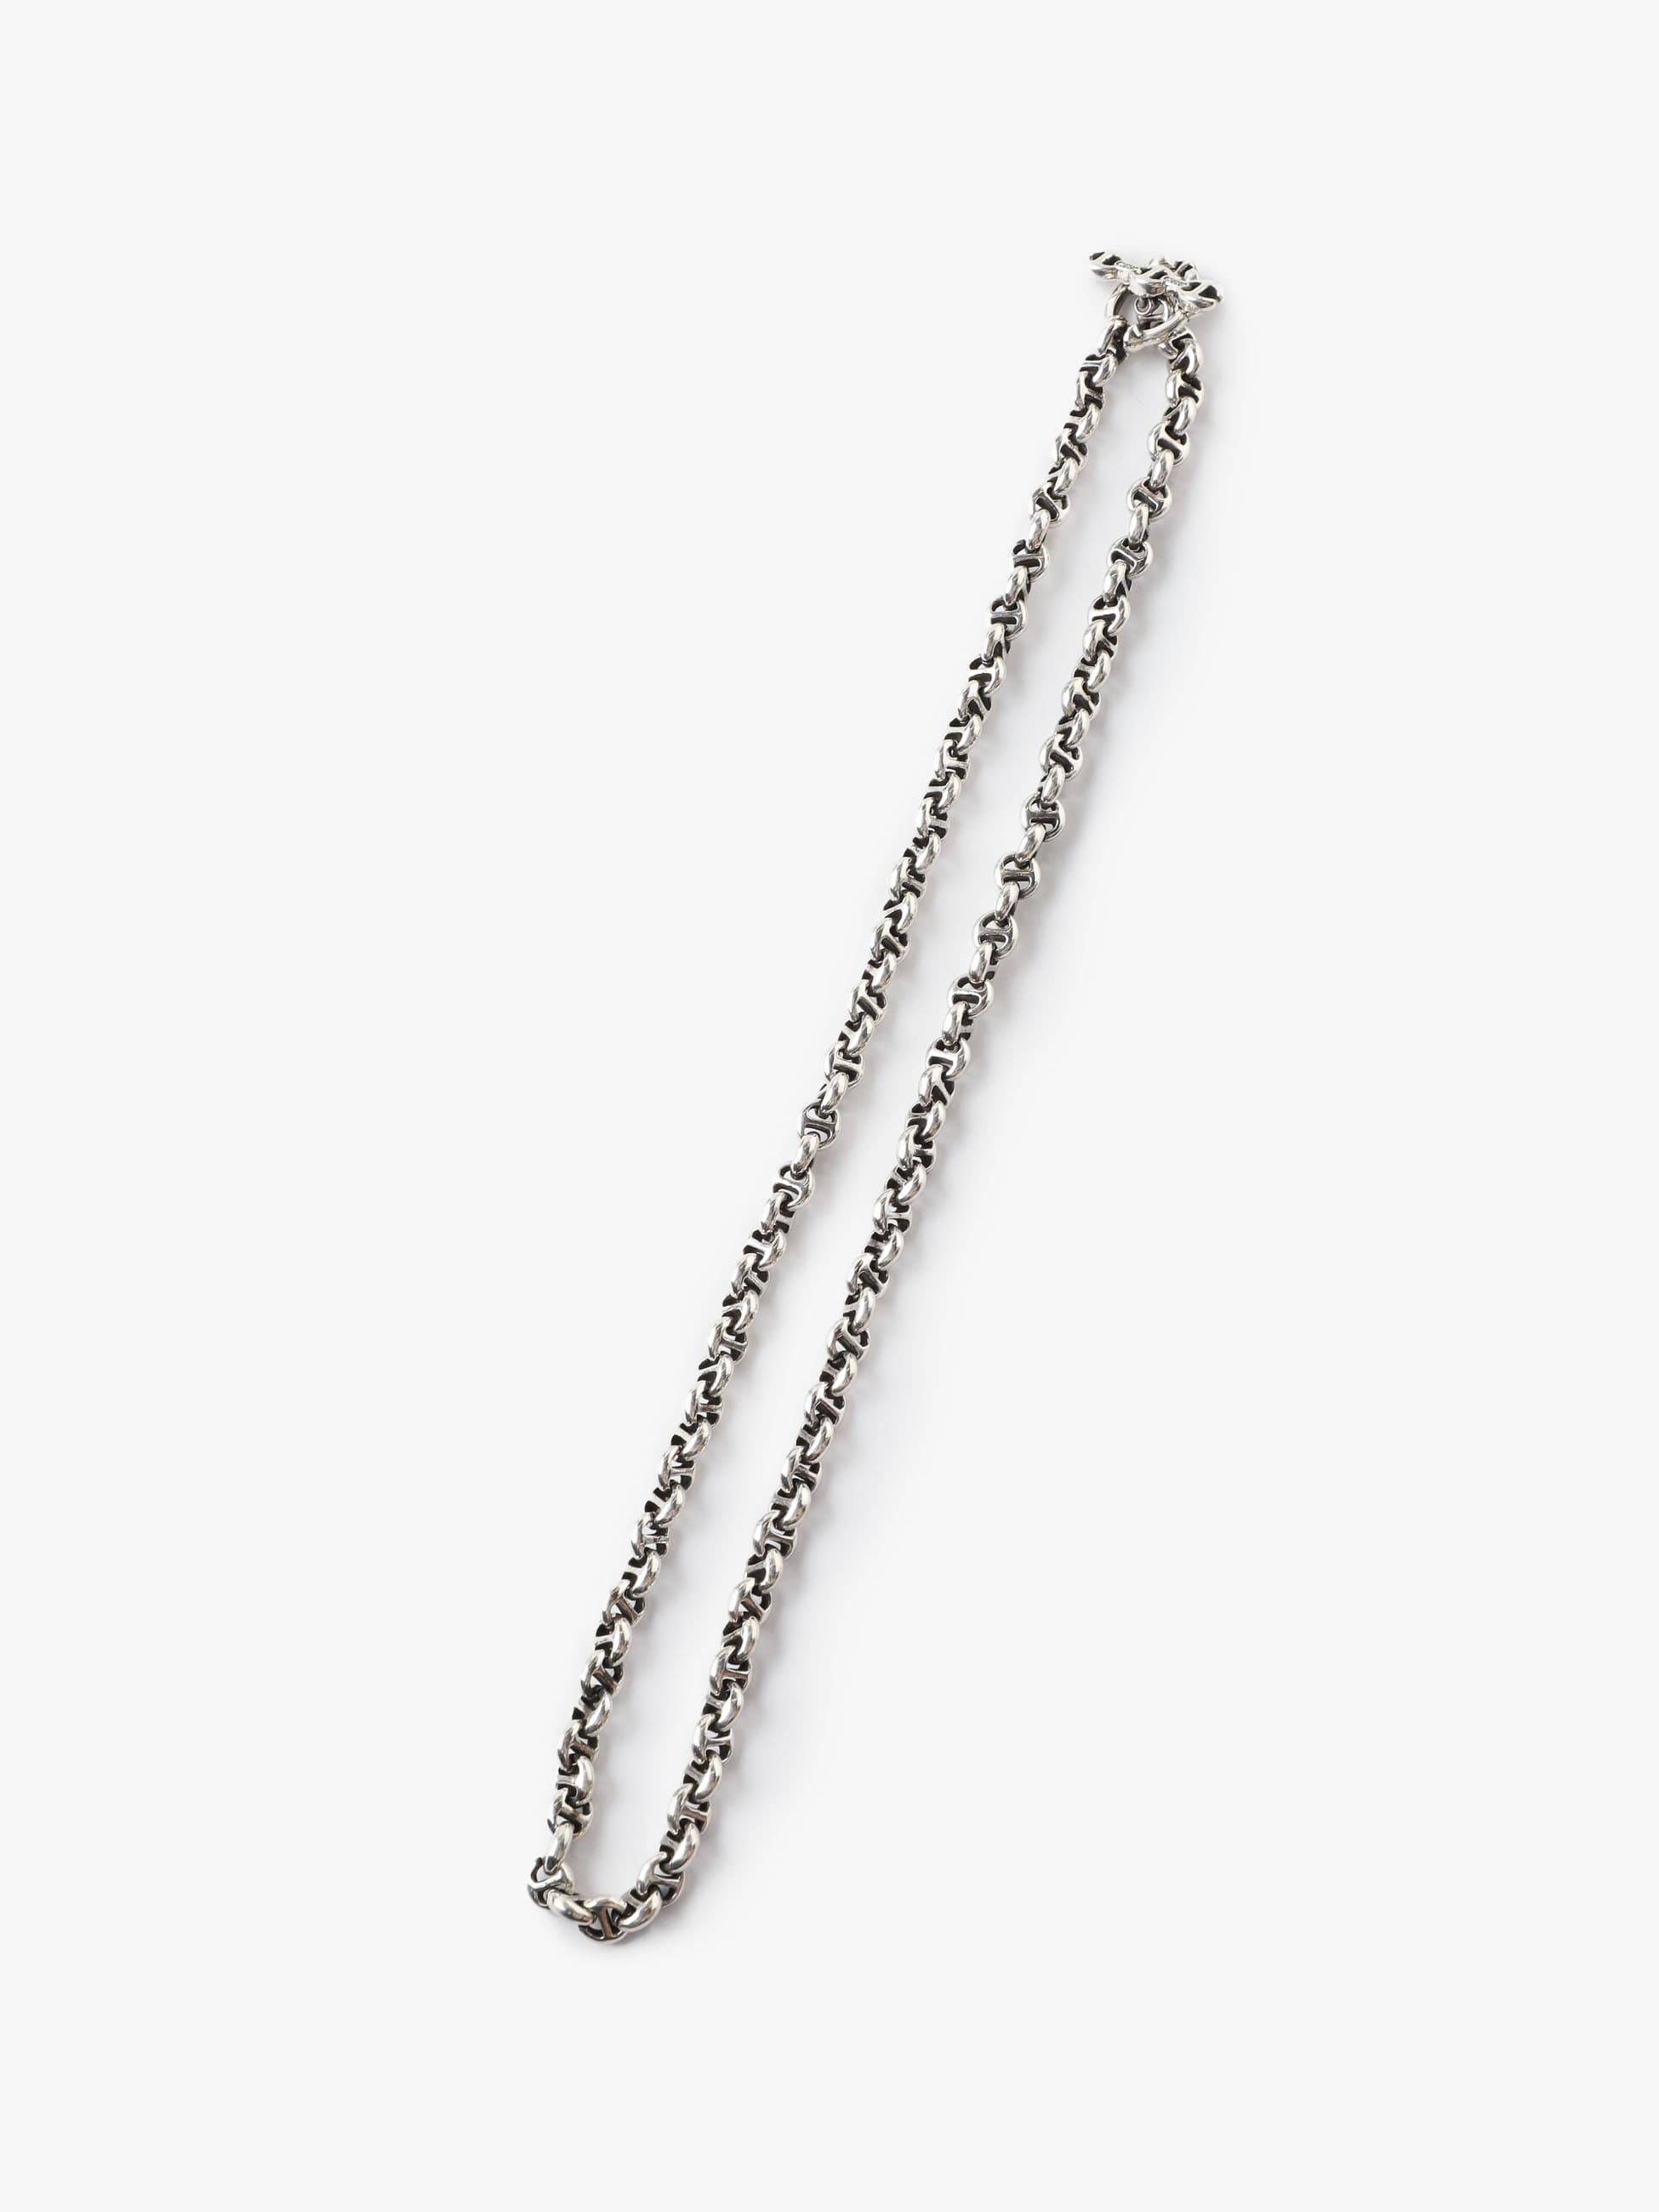 20in 5mm Open-link Necklace